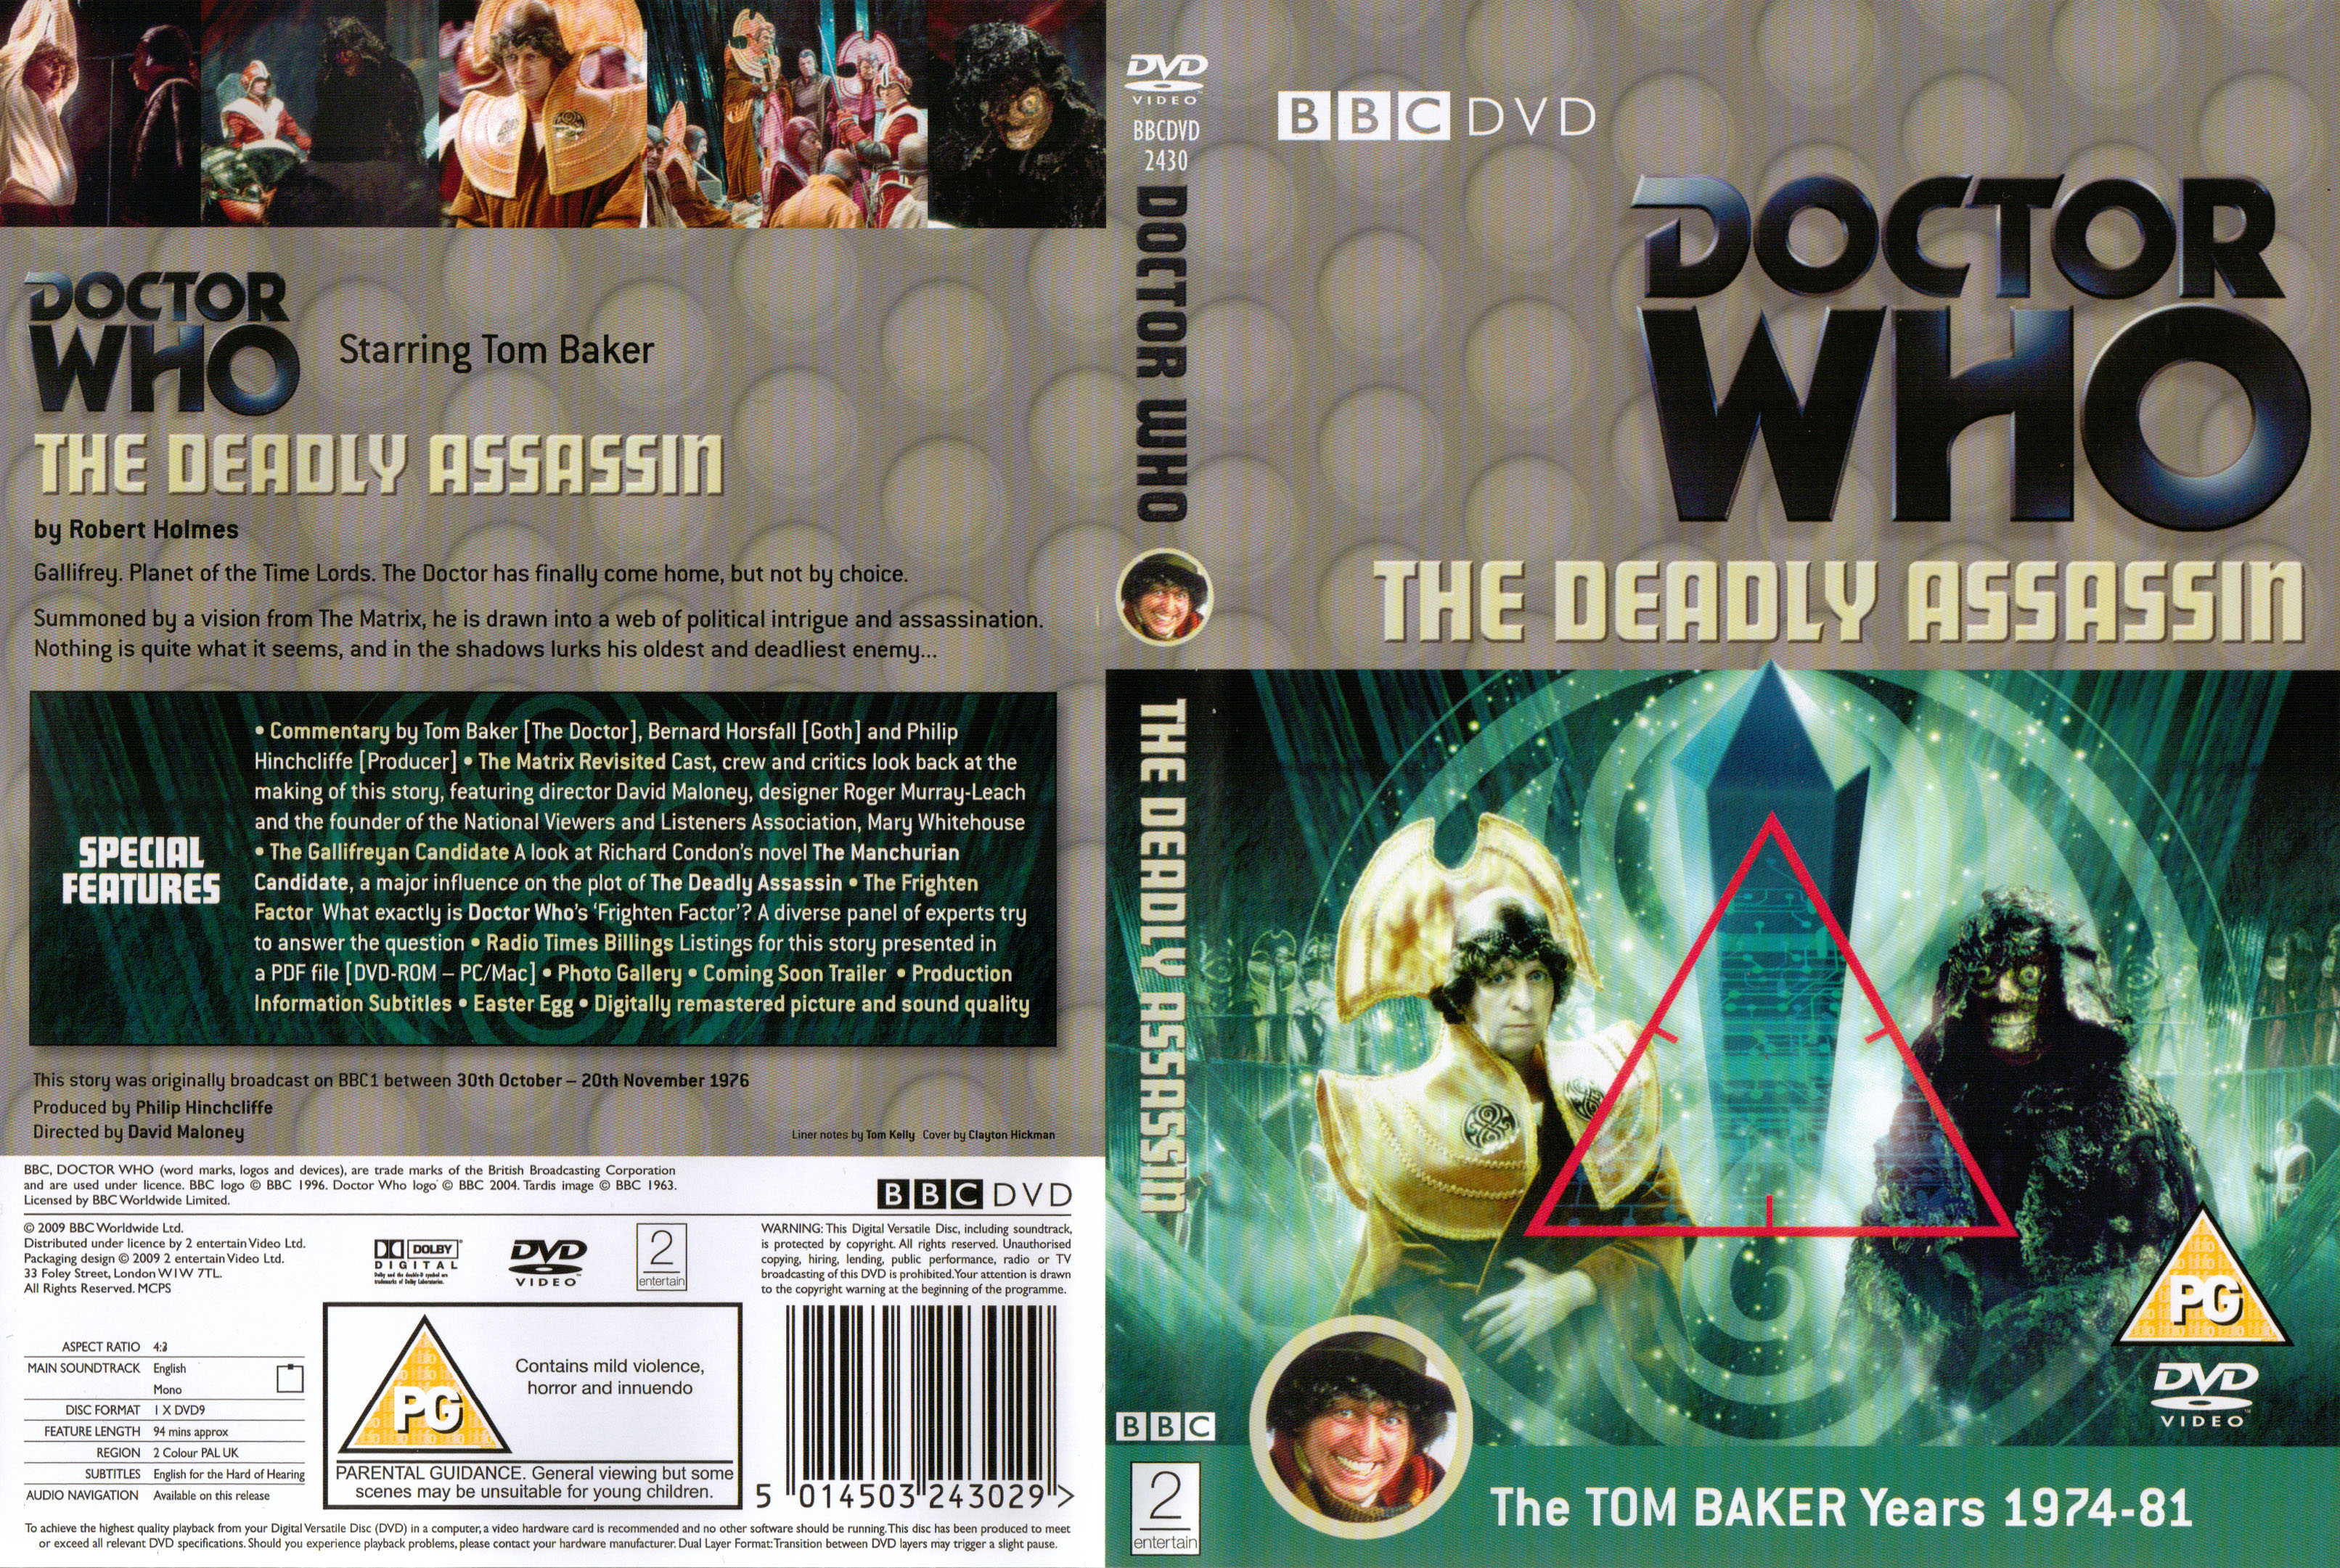 The Deadly Assassin DVD